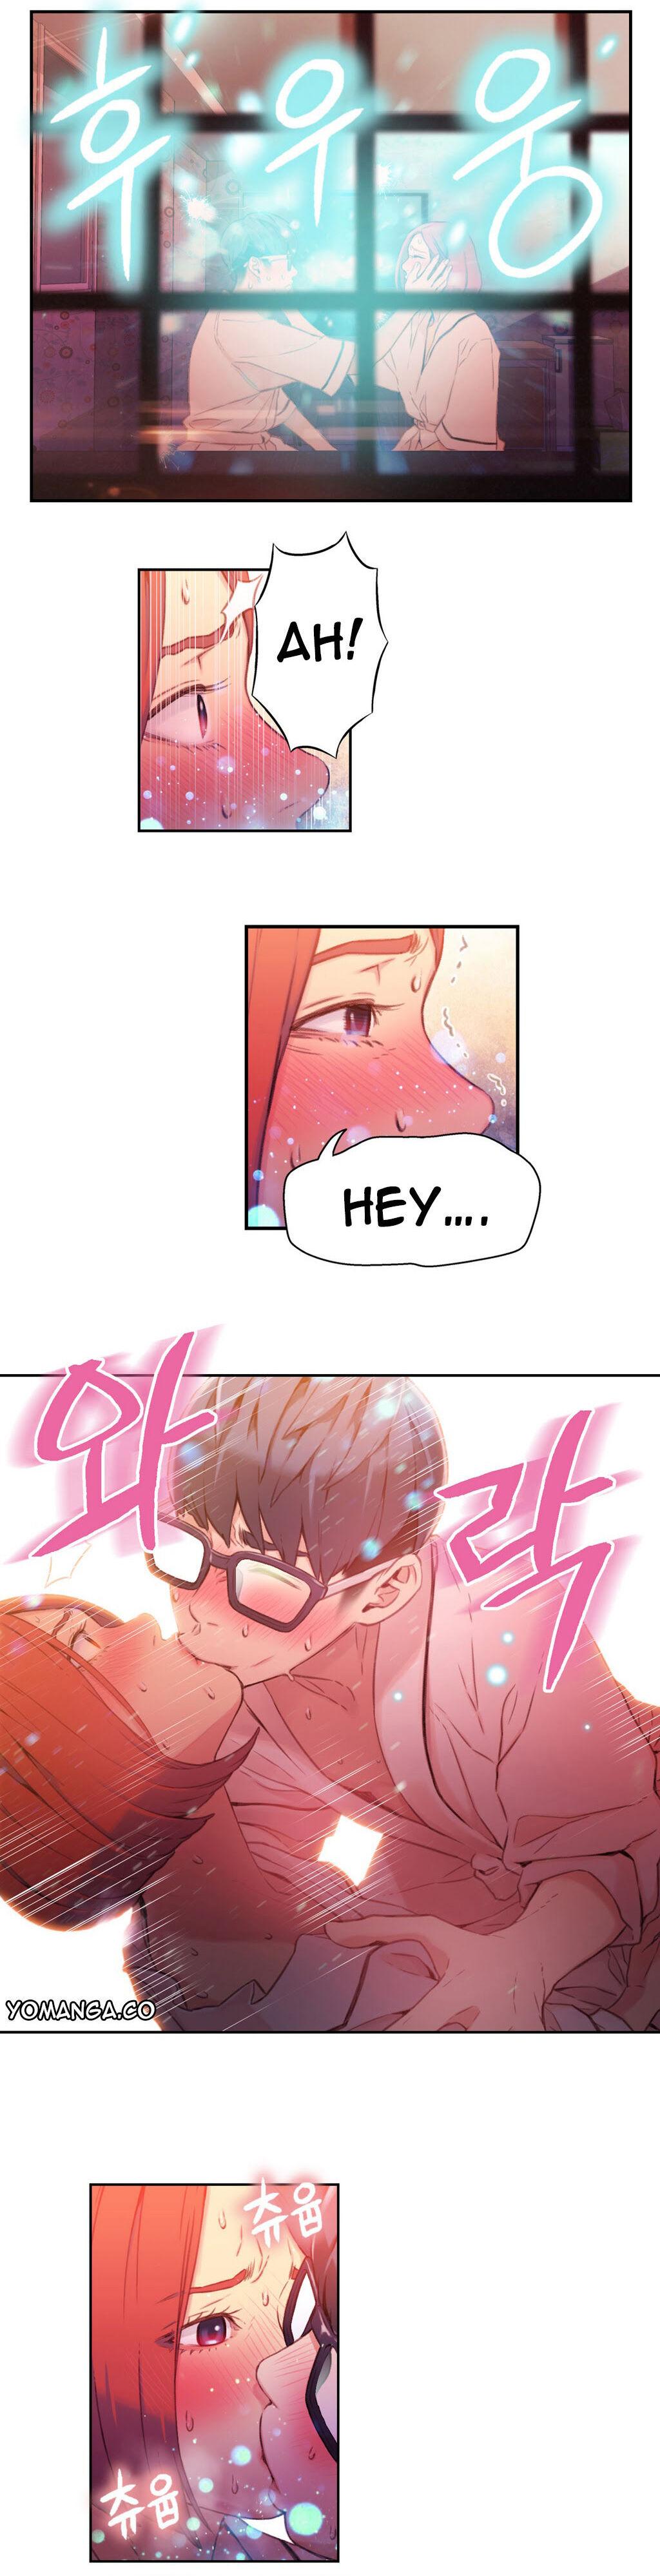 Glam Sweet Guy/He Does a Body Good Ch. 16-17 Alt - Page 11